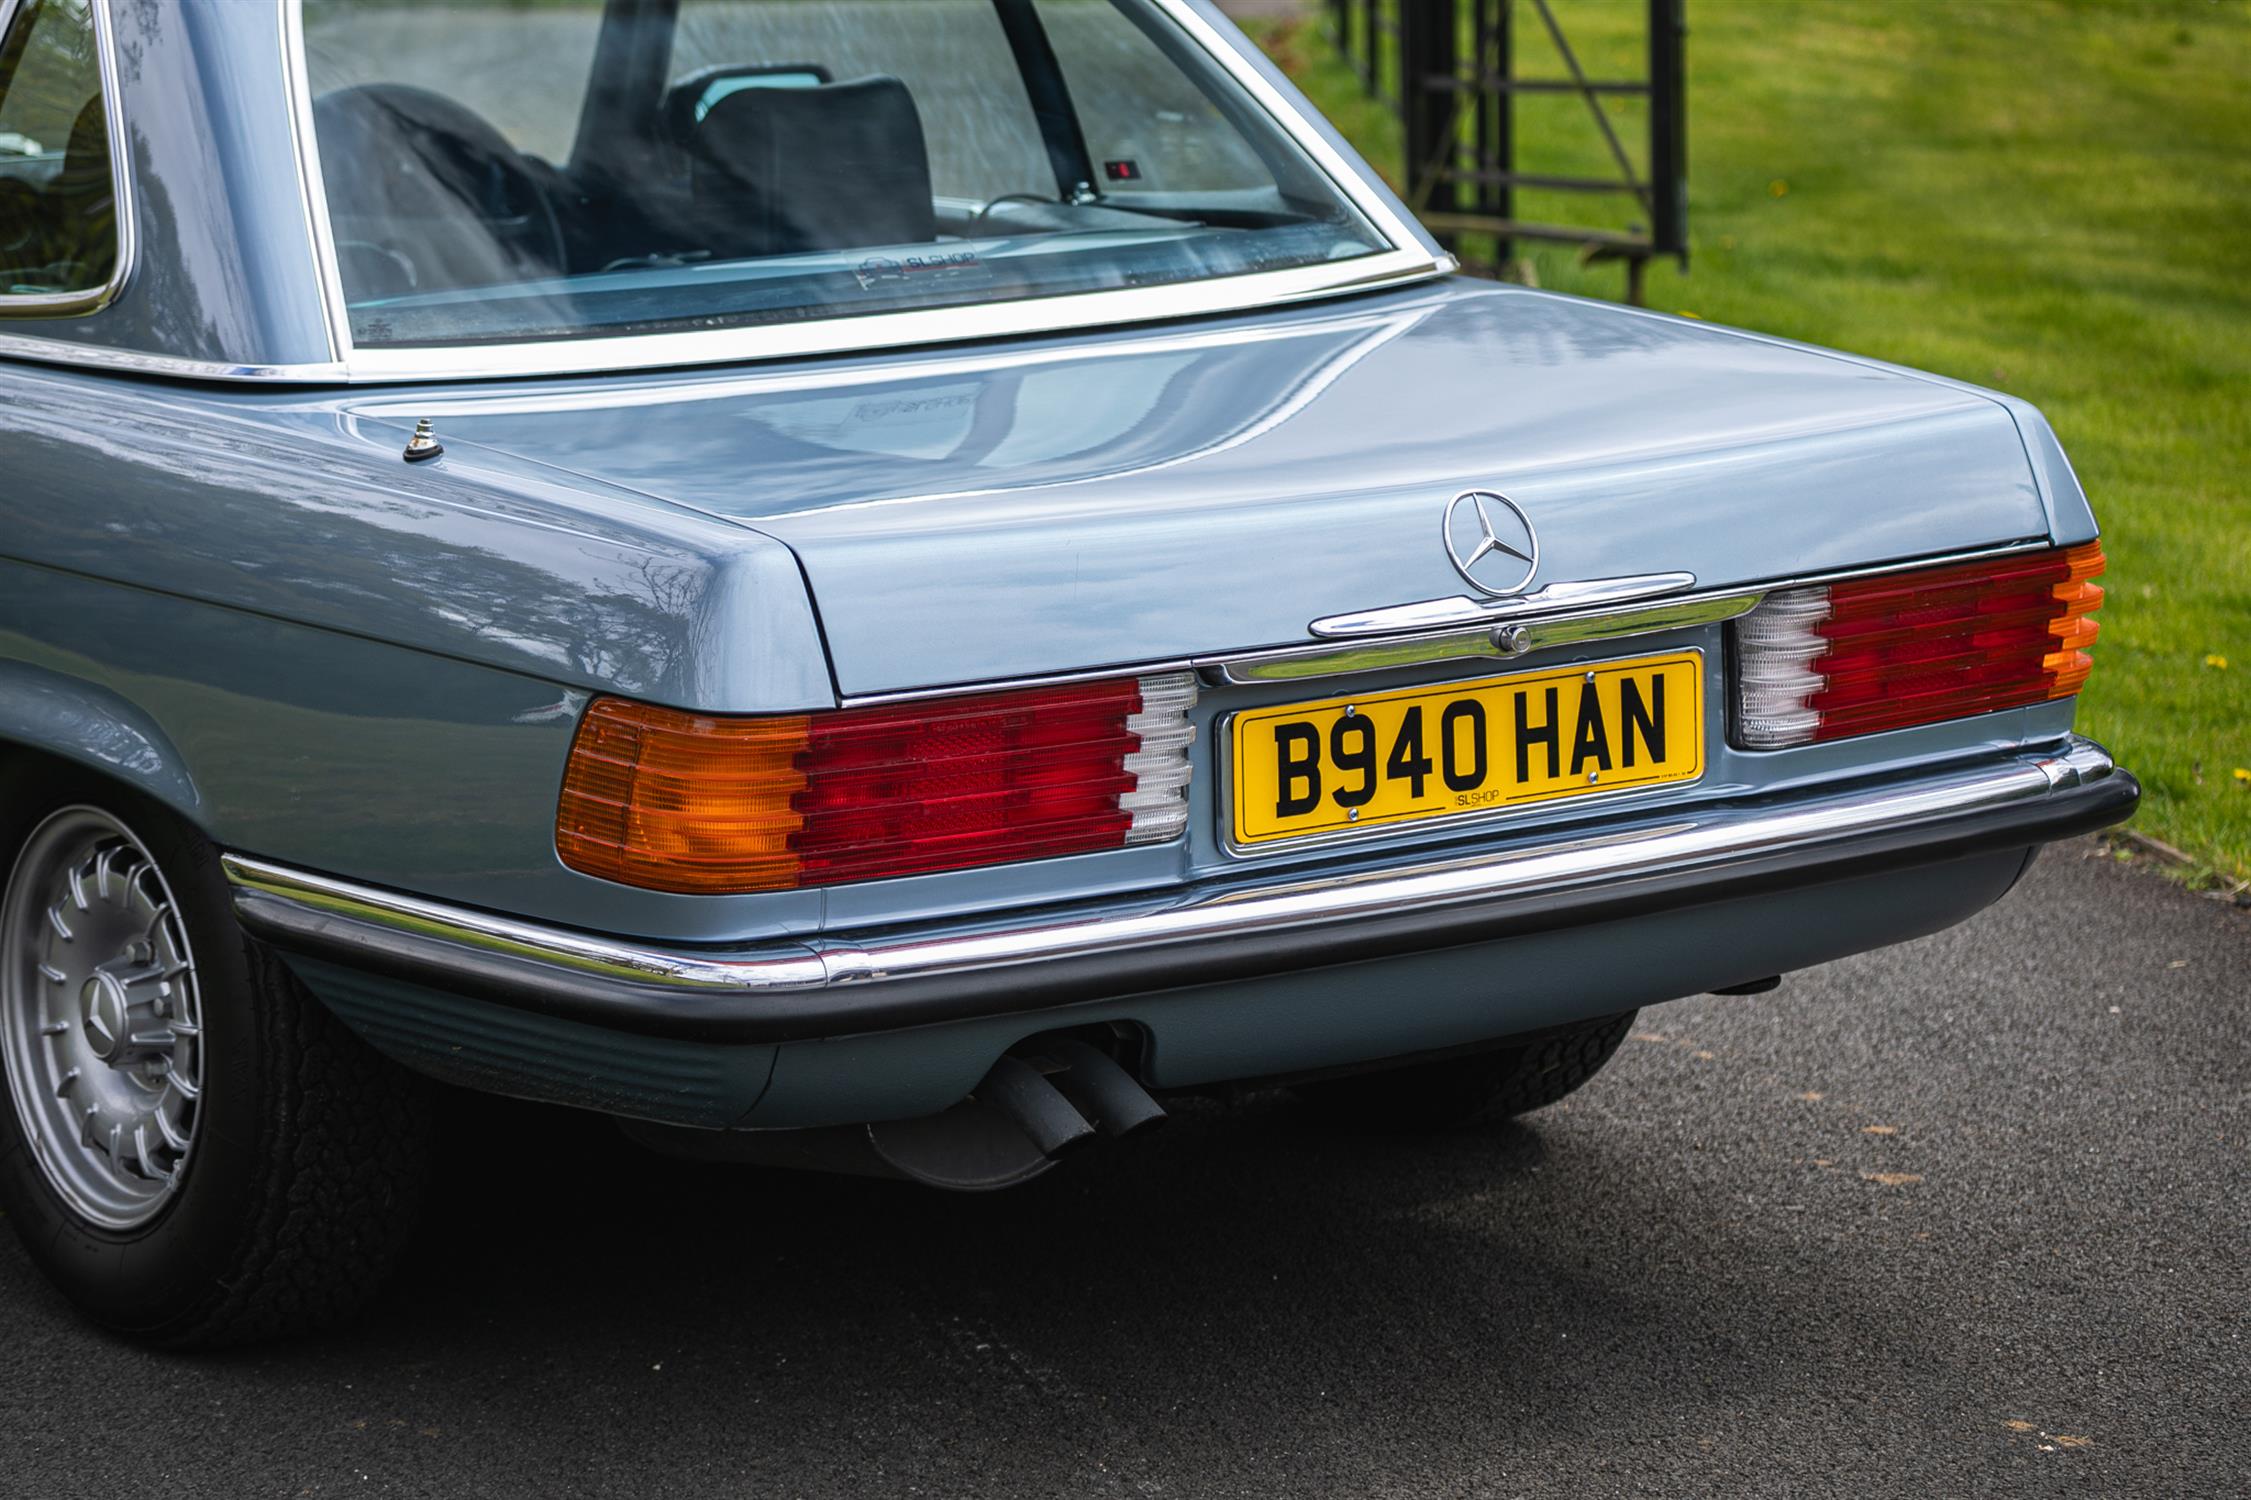 1985 Mercedes Benz 280SL (R107) with hardtop - 28,700 Miles - Image 9 of 10